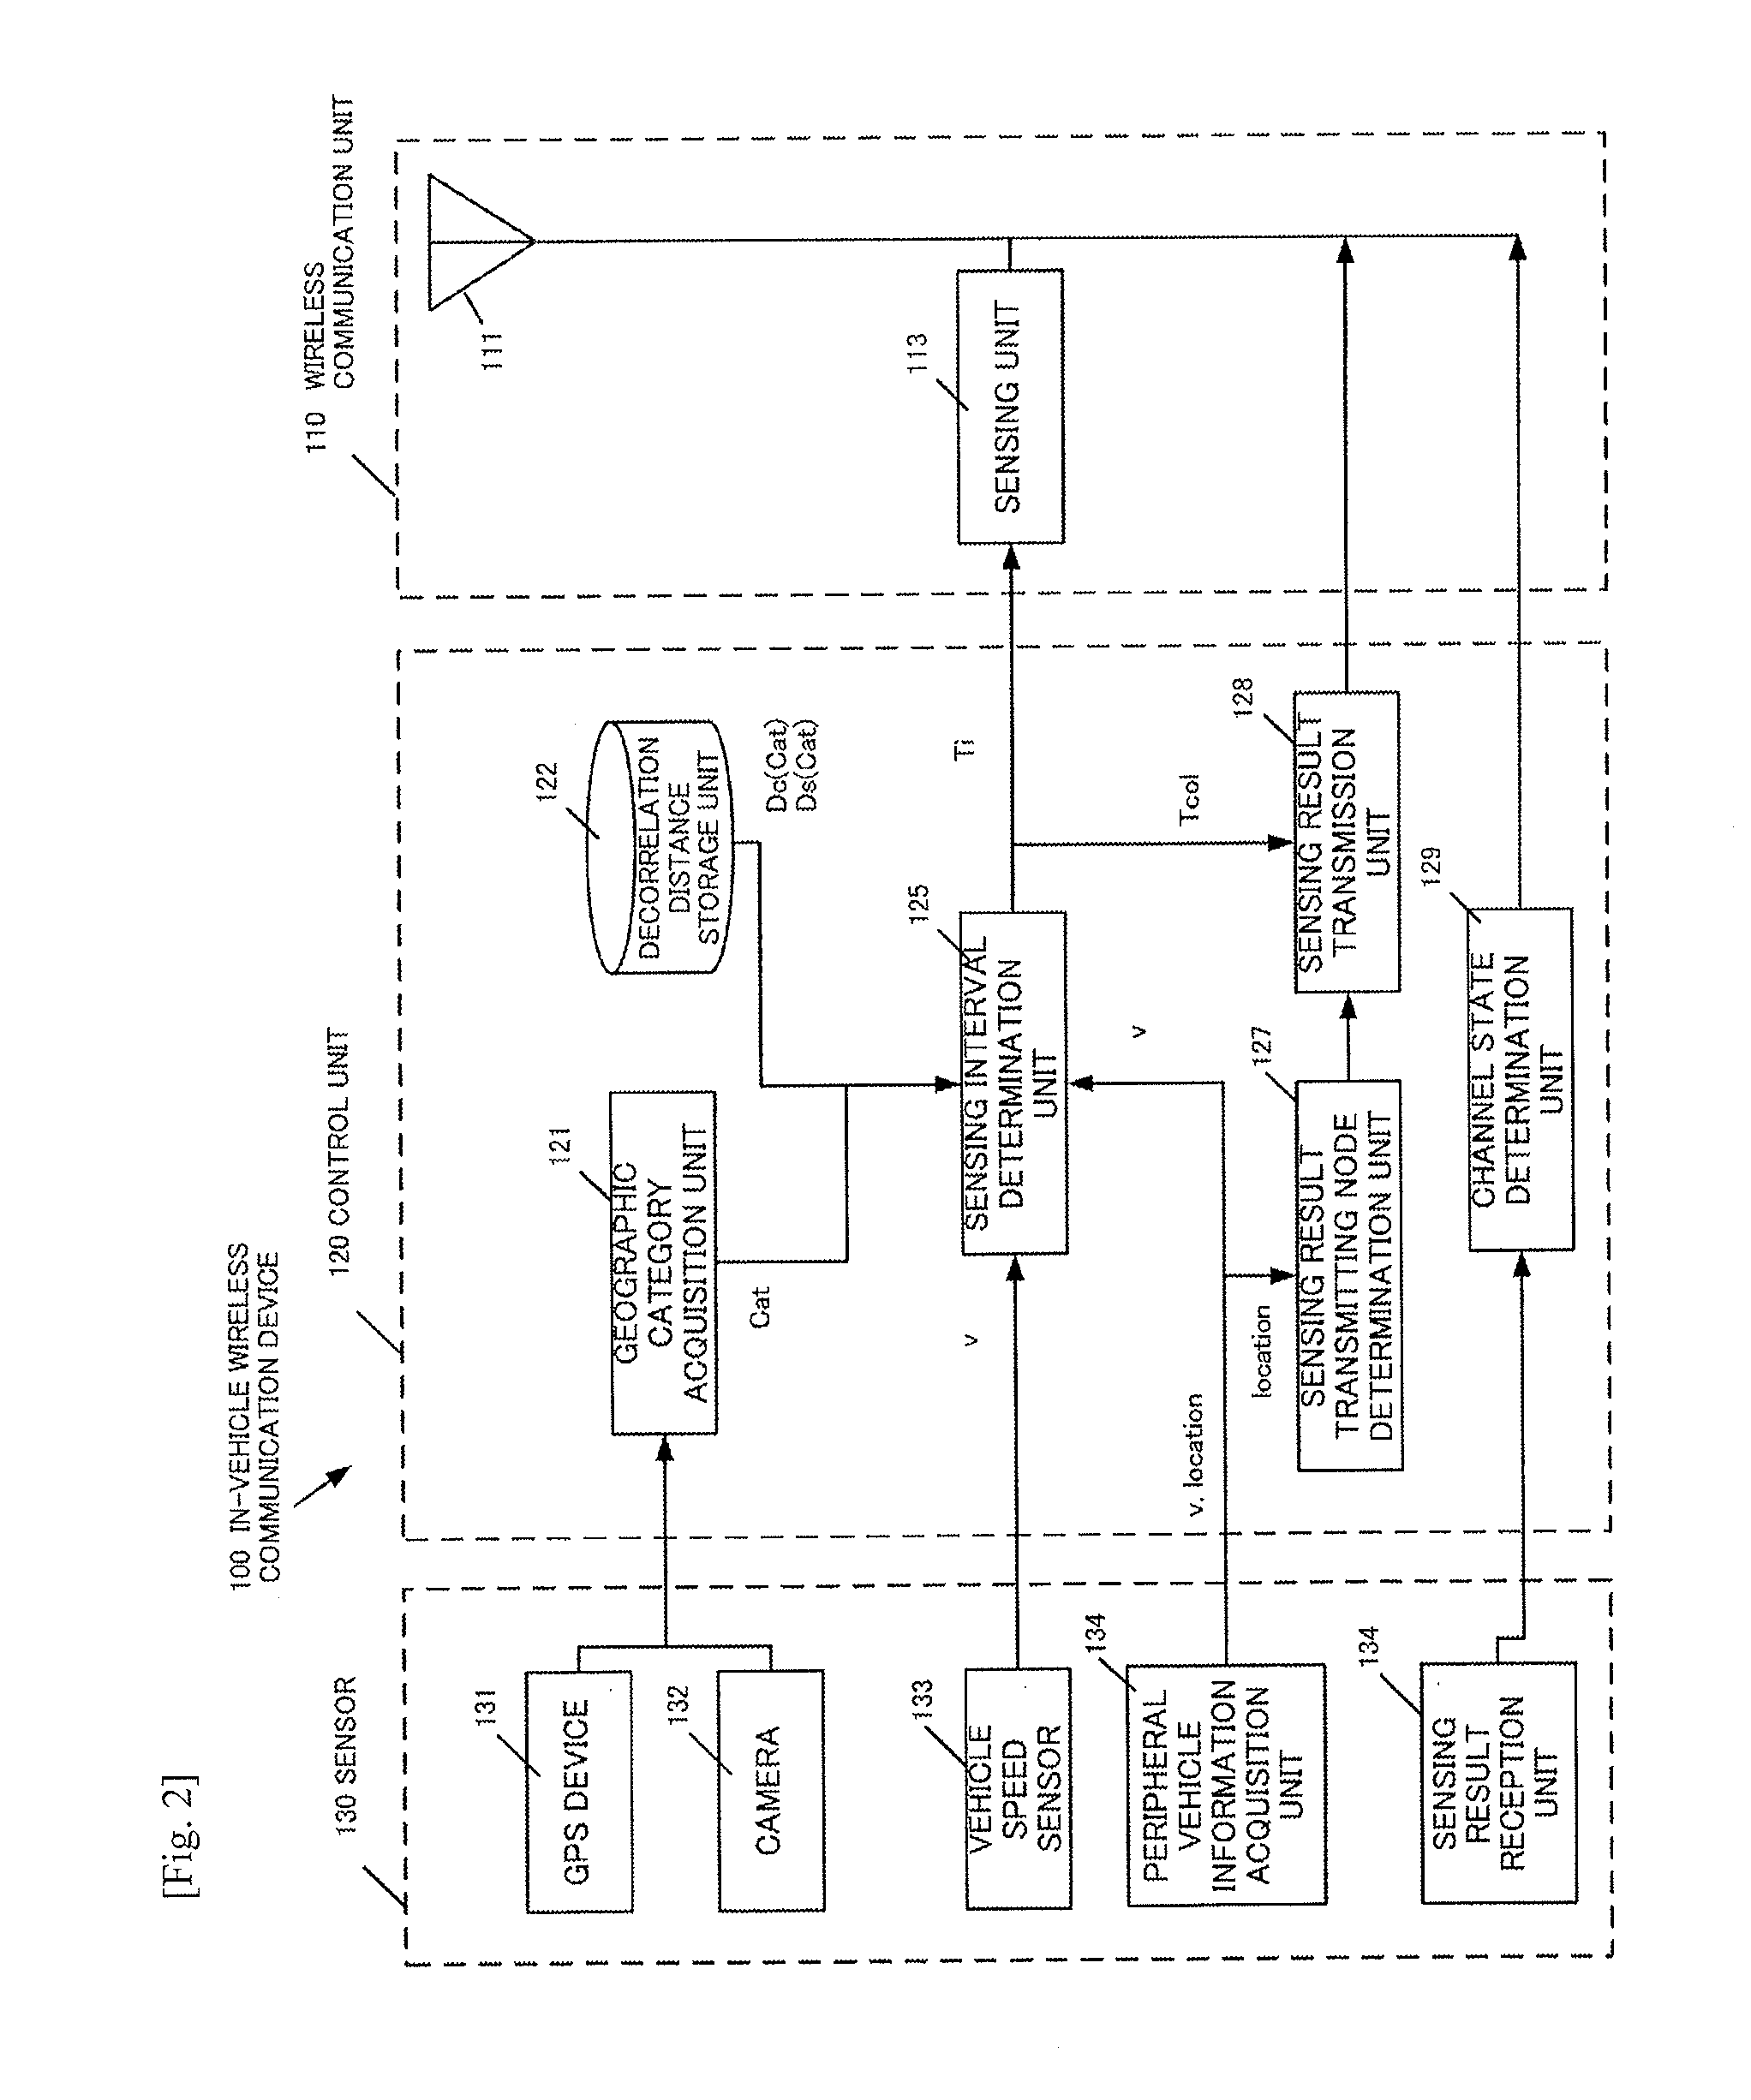 Cooperative spectrum sensing method and in-vehicle wireless communication device